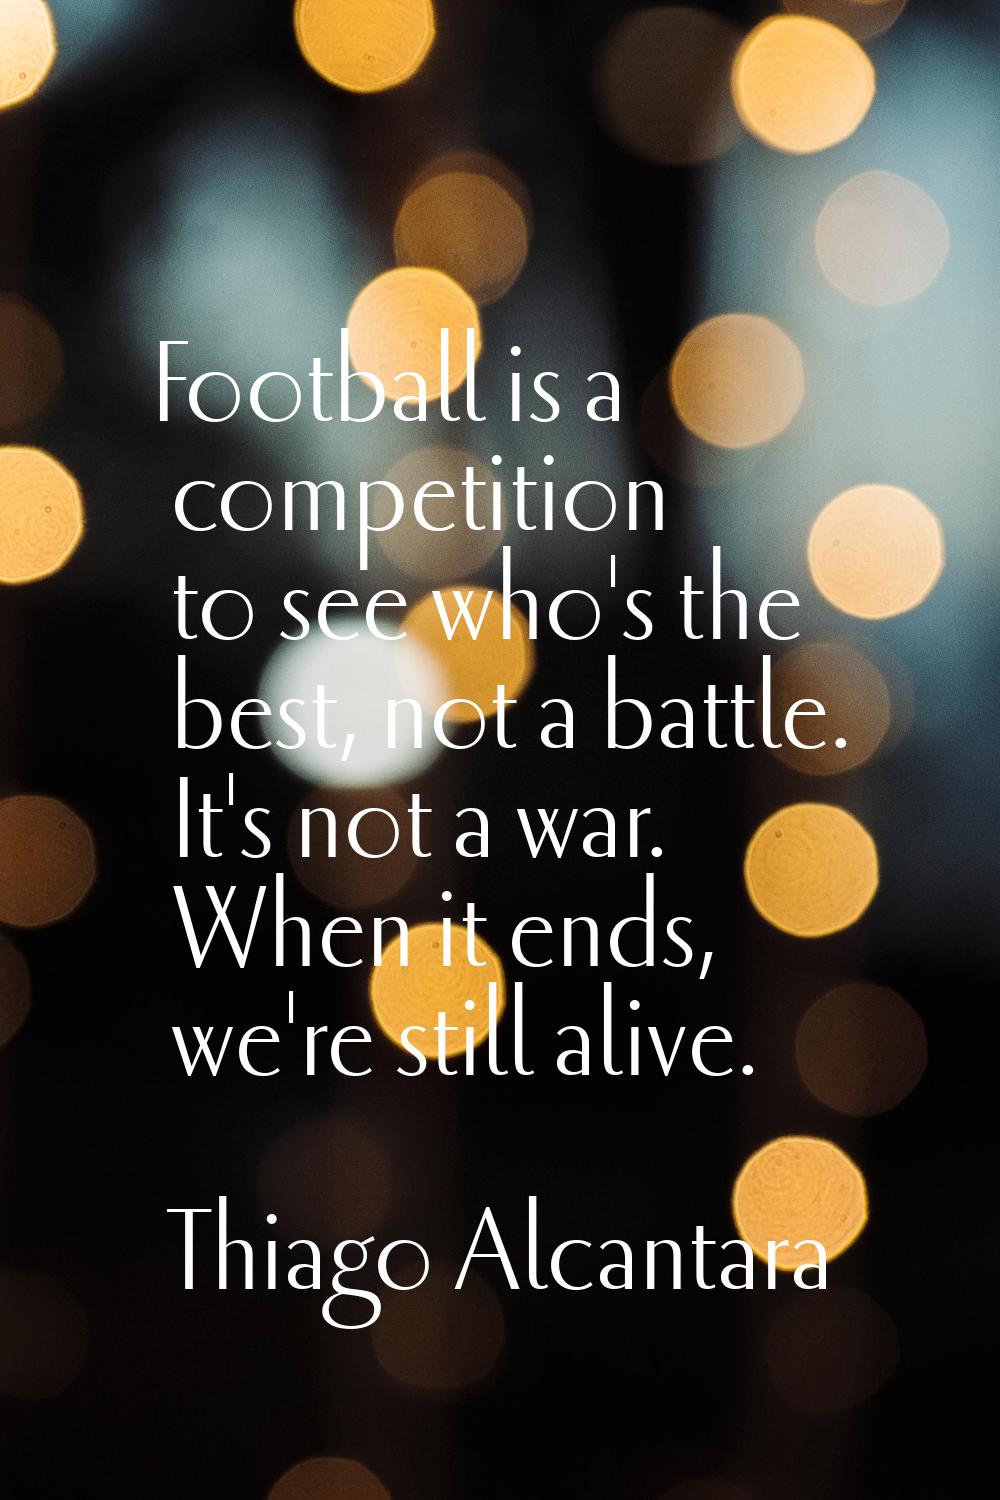 Football is a competition to see who's the best, not a battle. It's not a war. When it ends, we're 